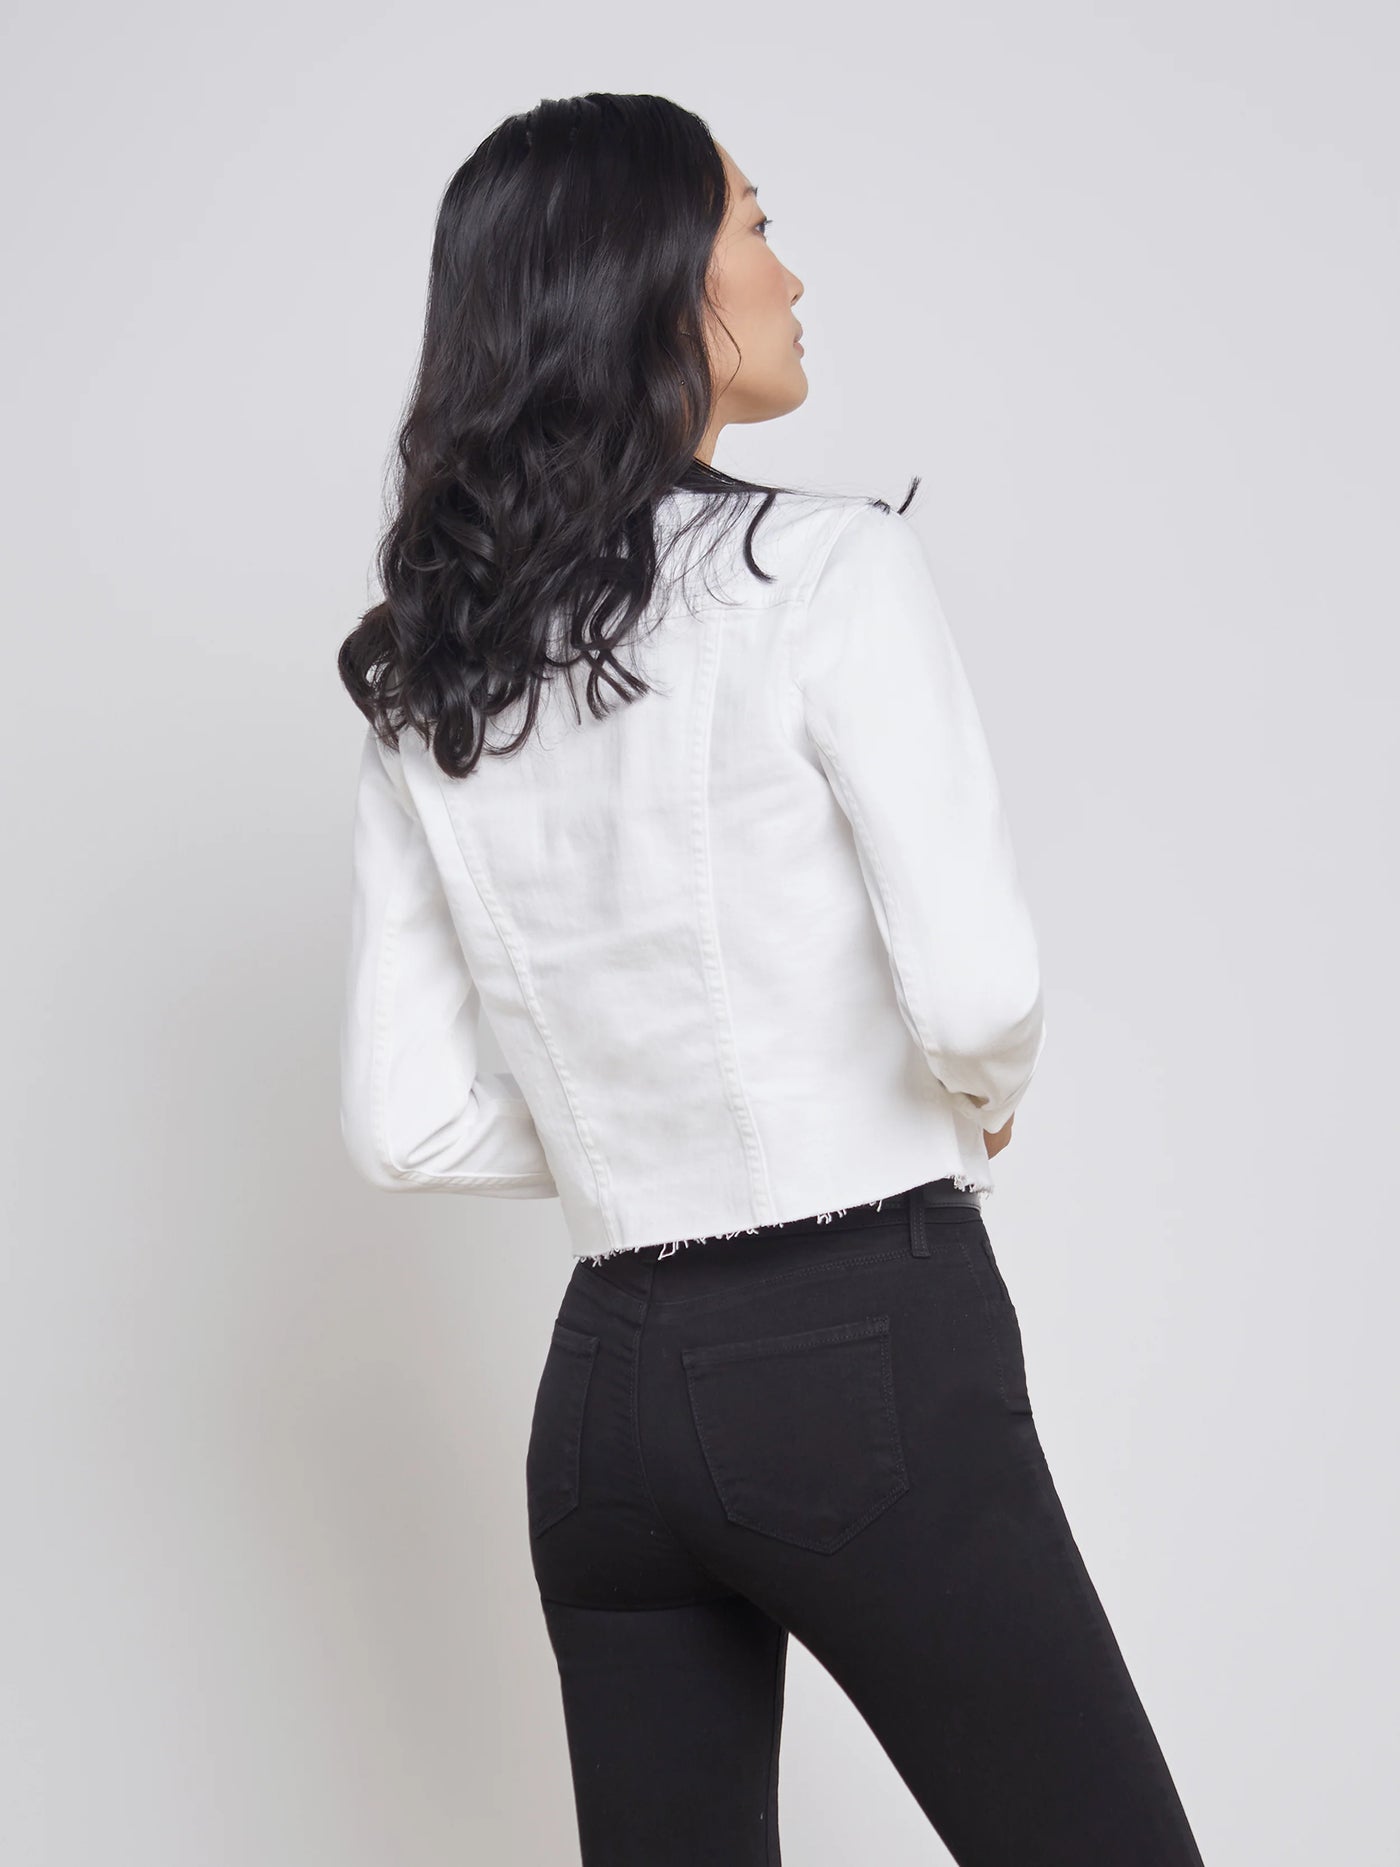 JANELLE SLIM RAW JACKET IN WHITE - Romi Boutique